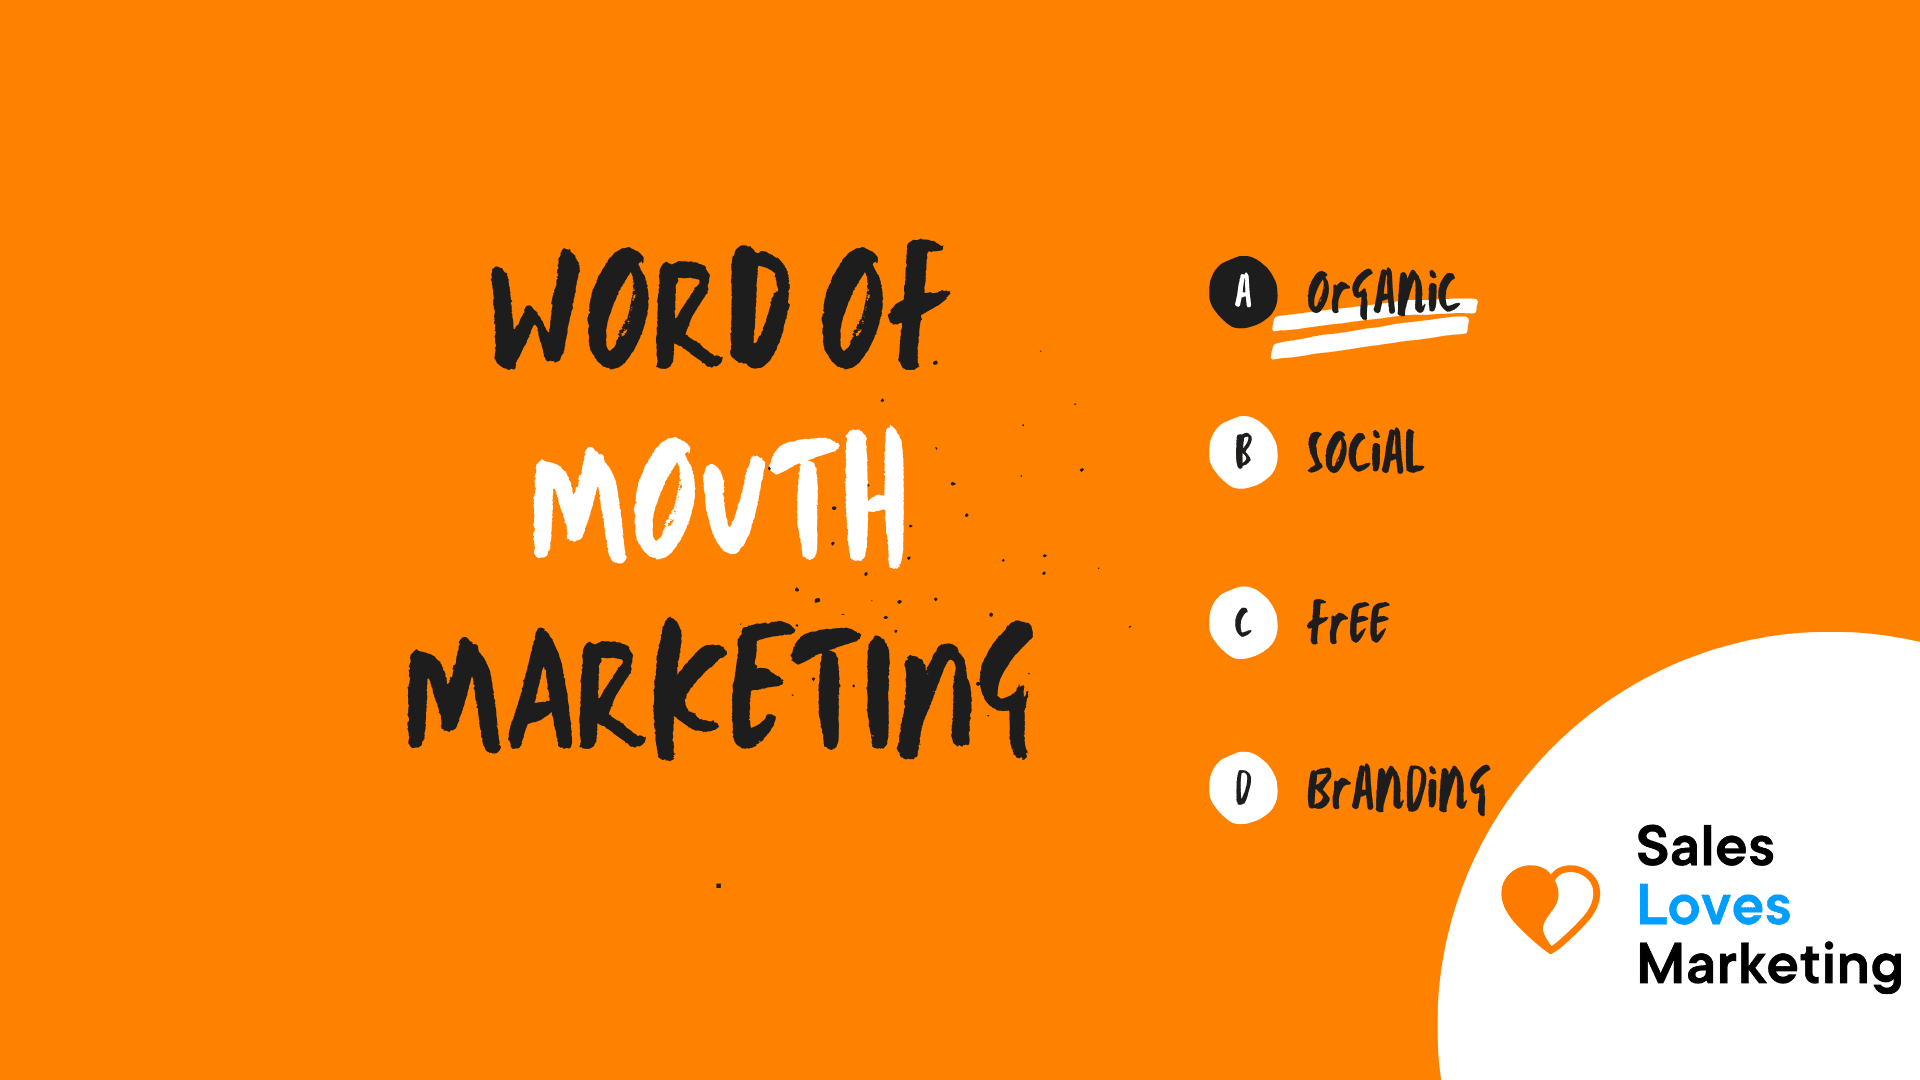 Worth Of Mouth Marketing (WOMM)